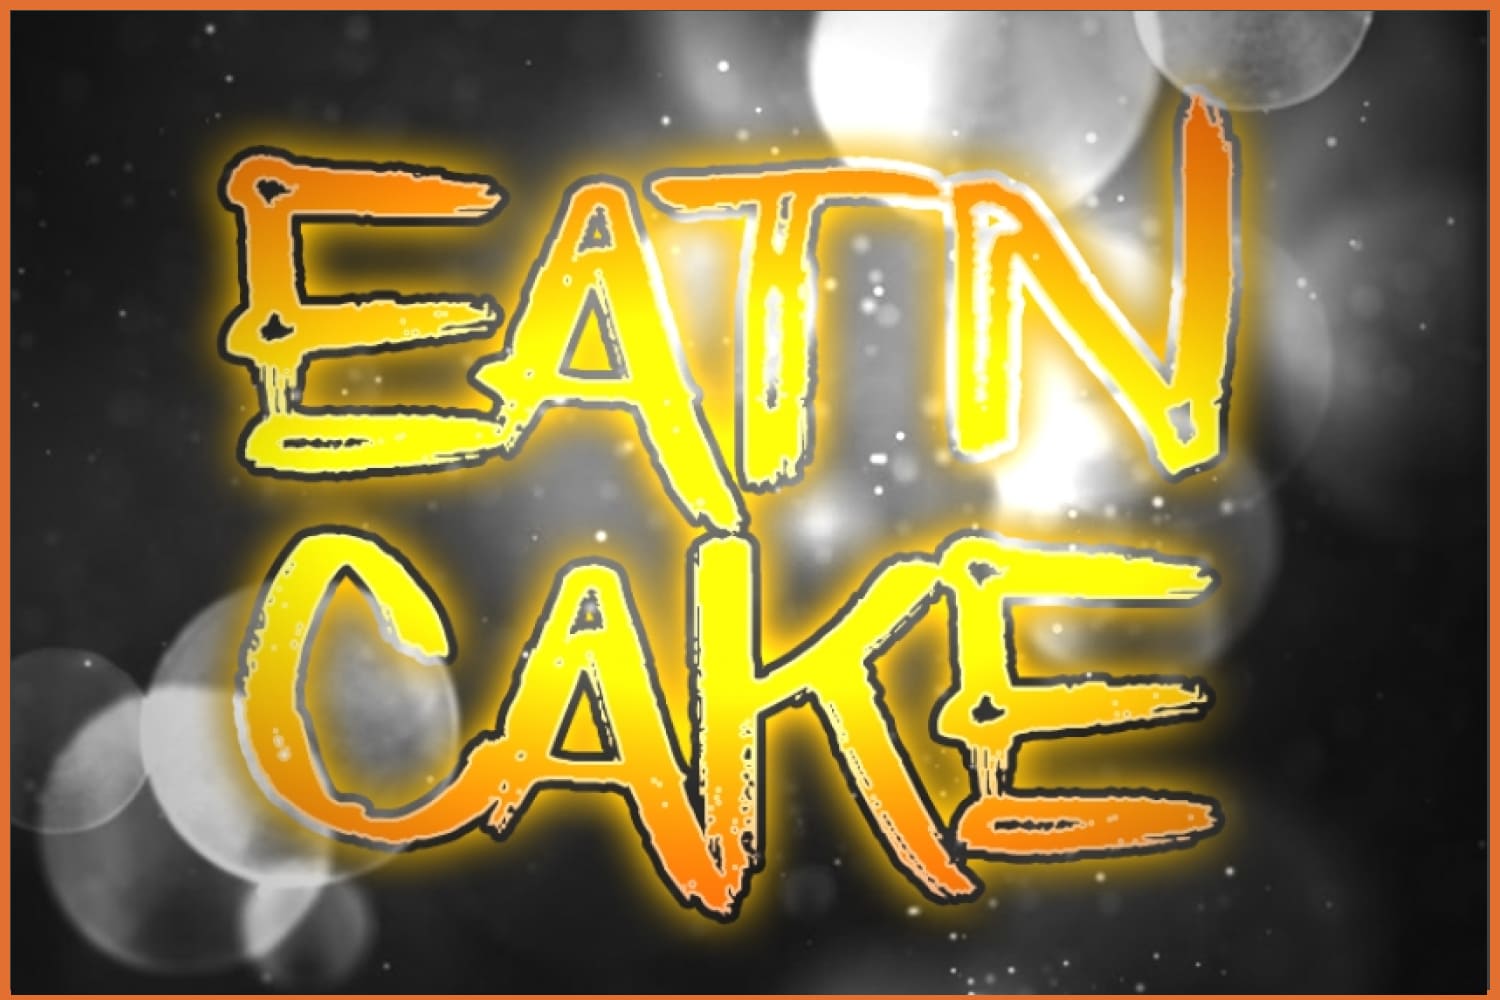 Yellow text Eatn Cake on abstract background.